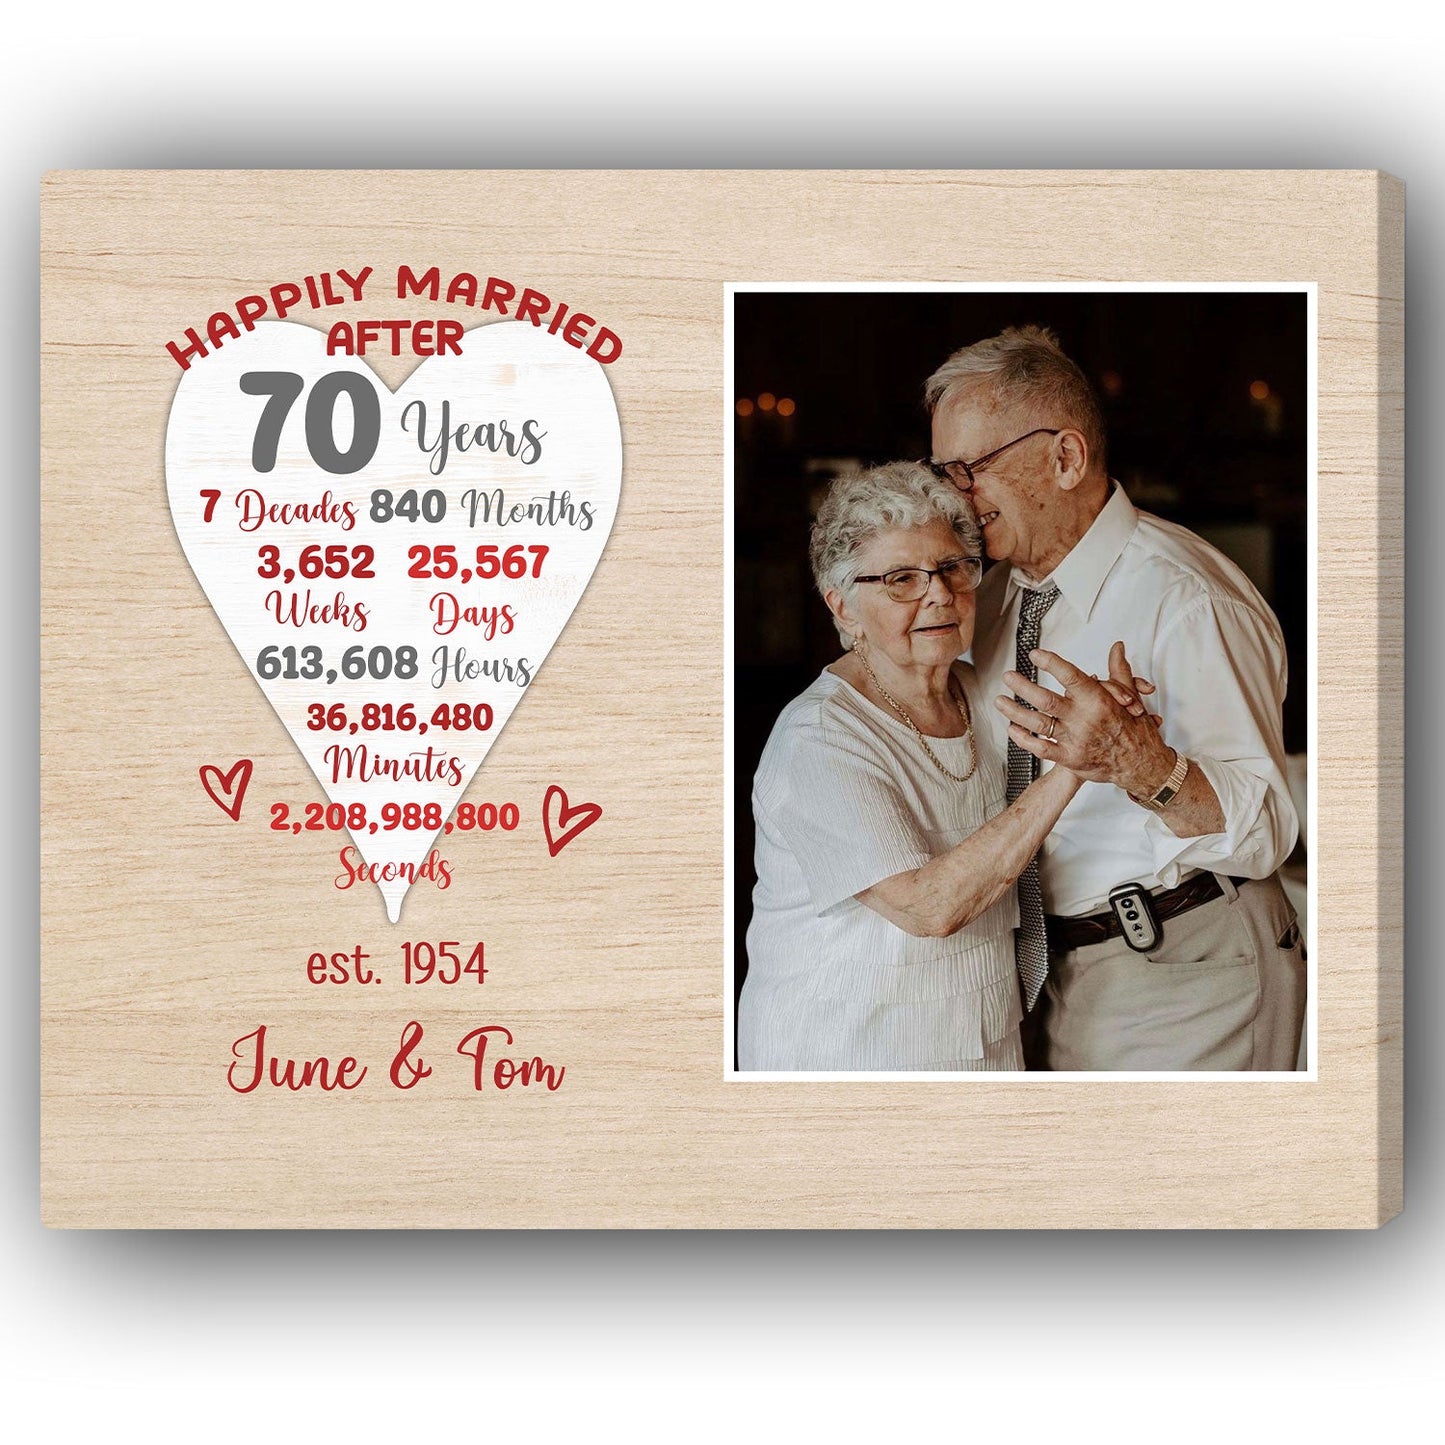 Happily Married After 70 Years - Personalized 70 Year Anniversary gift For Parents - Custom Canvas Print - MyMindfulGifts